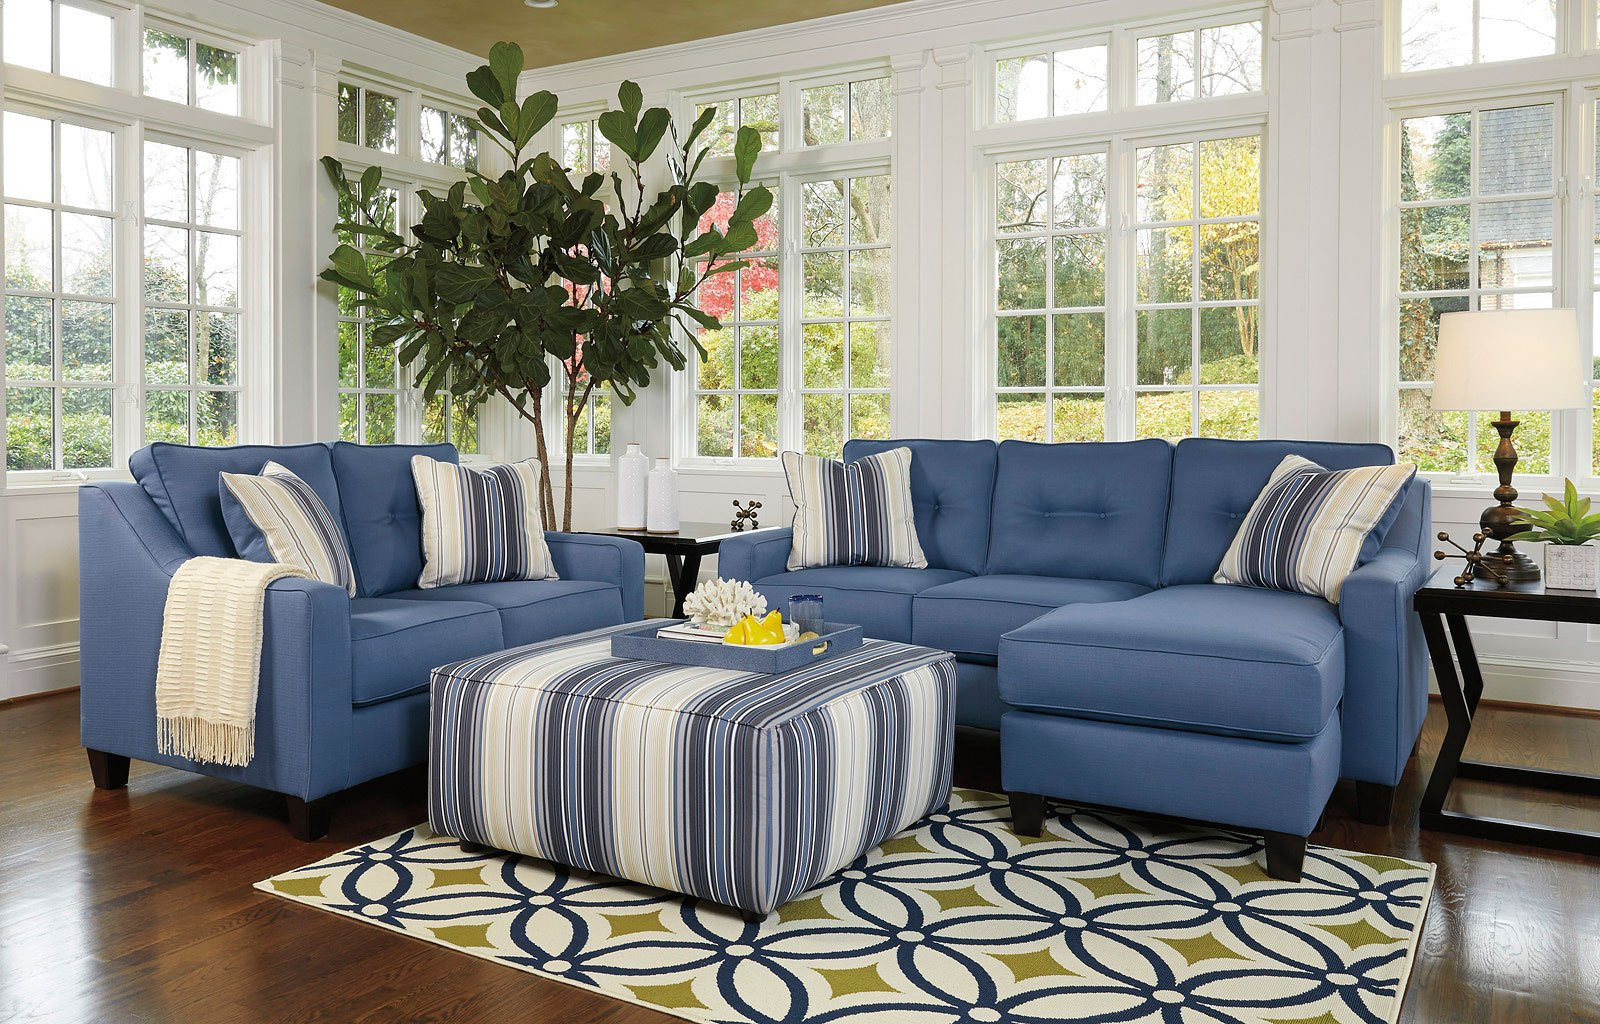 Blue Living Room Chair
 Al Nuvella Blue Living Room Set by Benchcraft